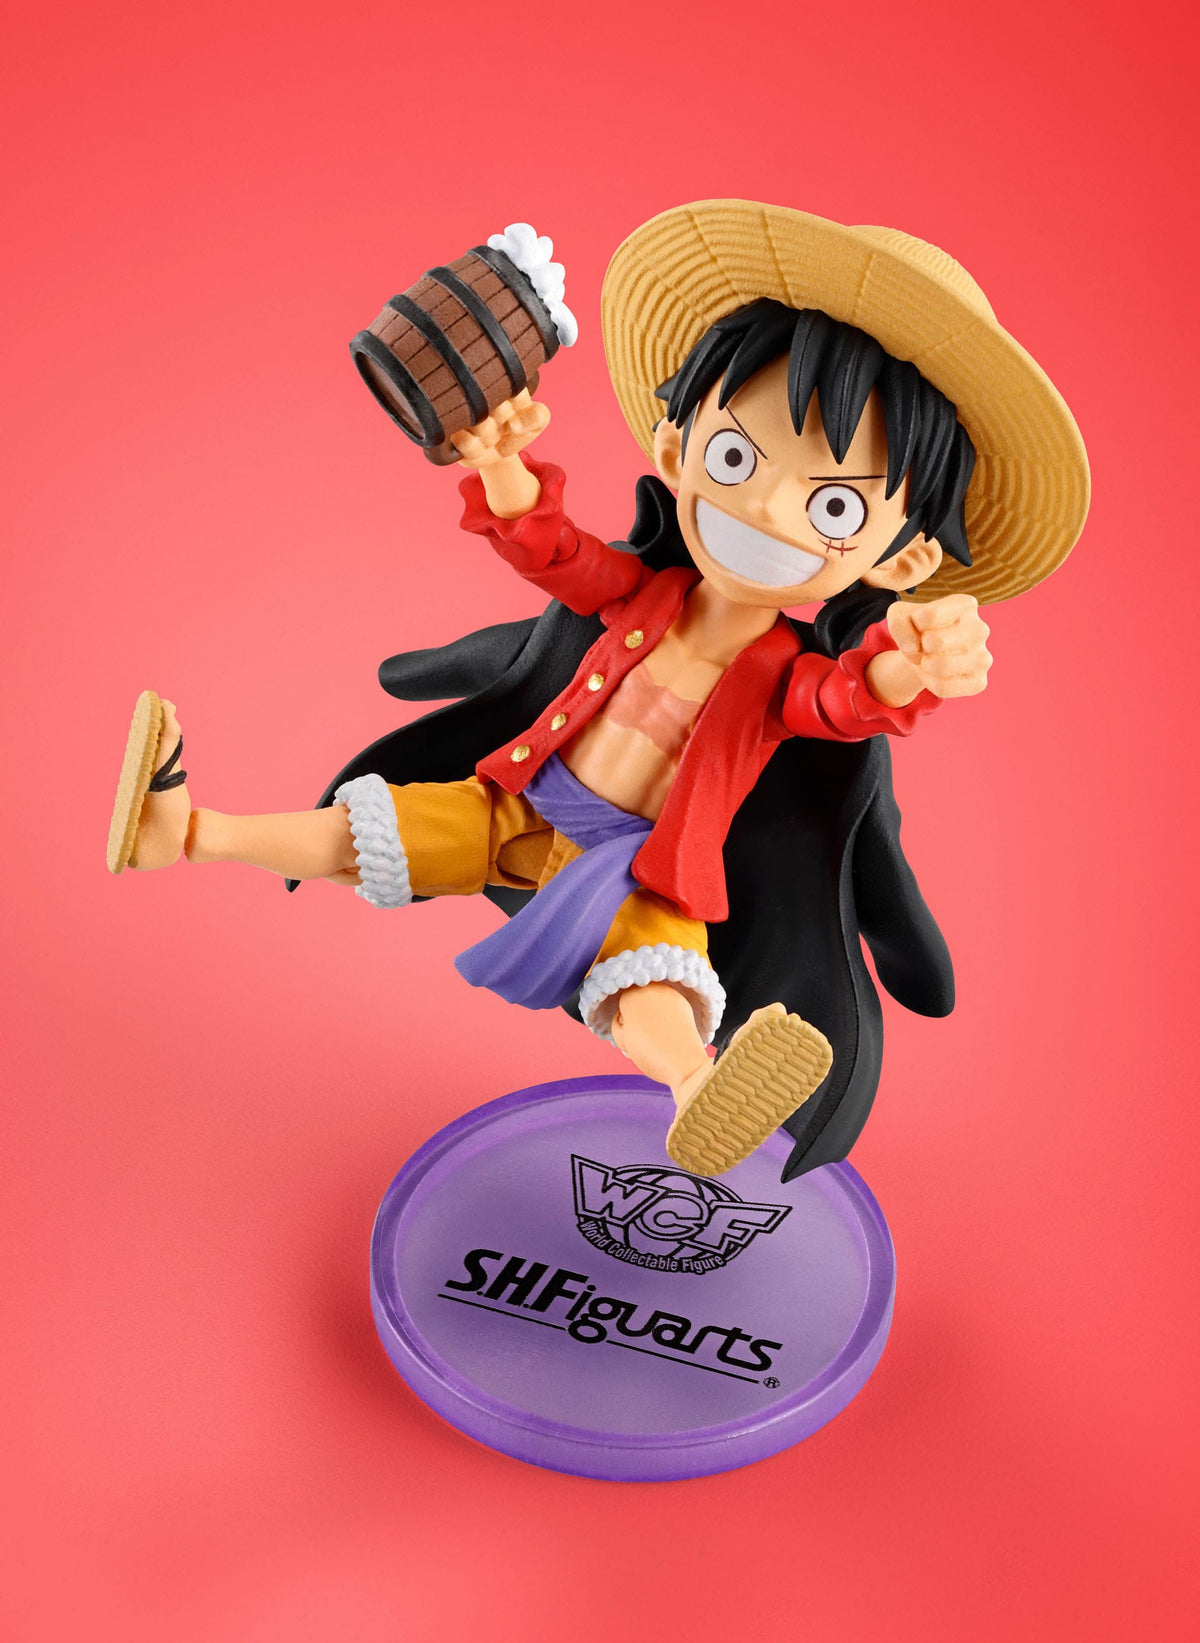 One Piece - Monkey D. Ruffy - World Collactable x S.H. Figuarts Figur (Bandai)